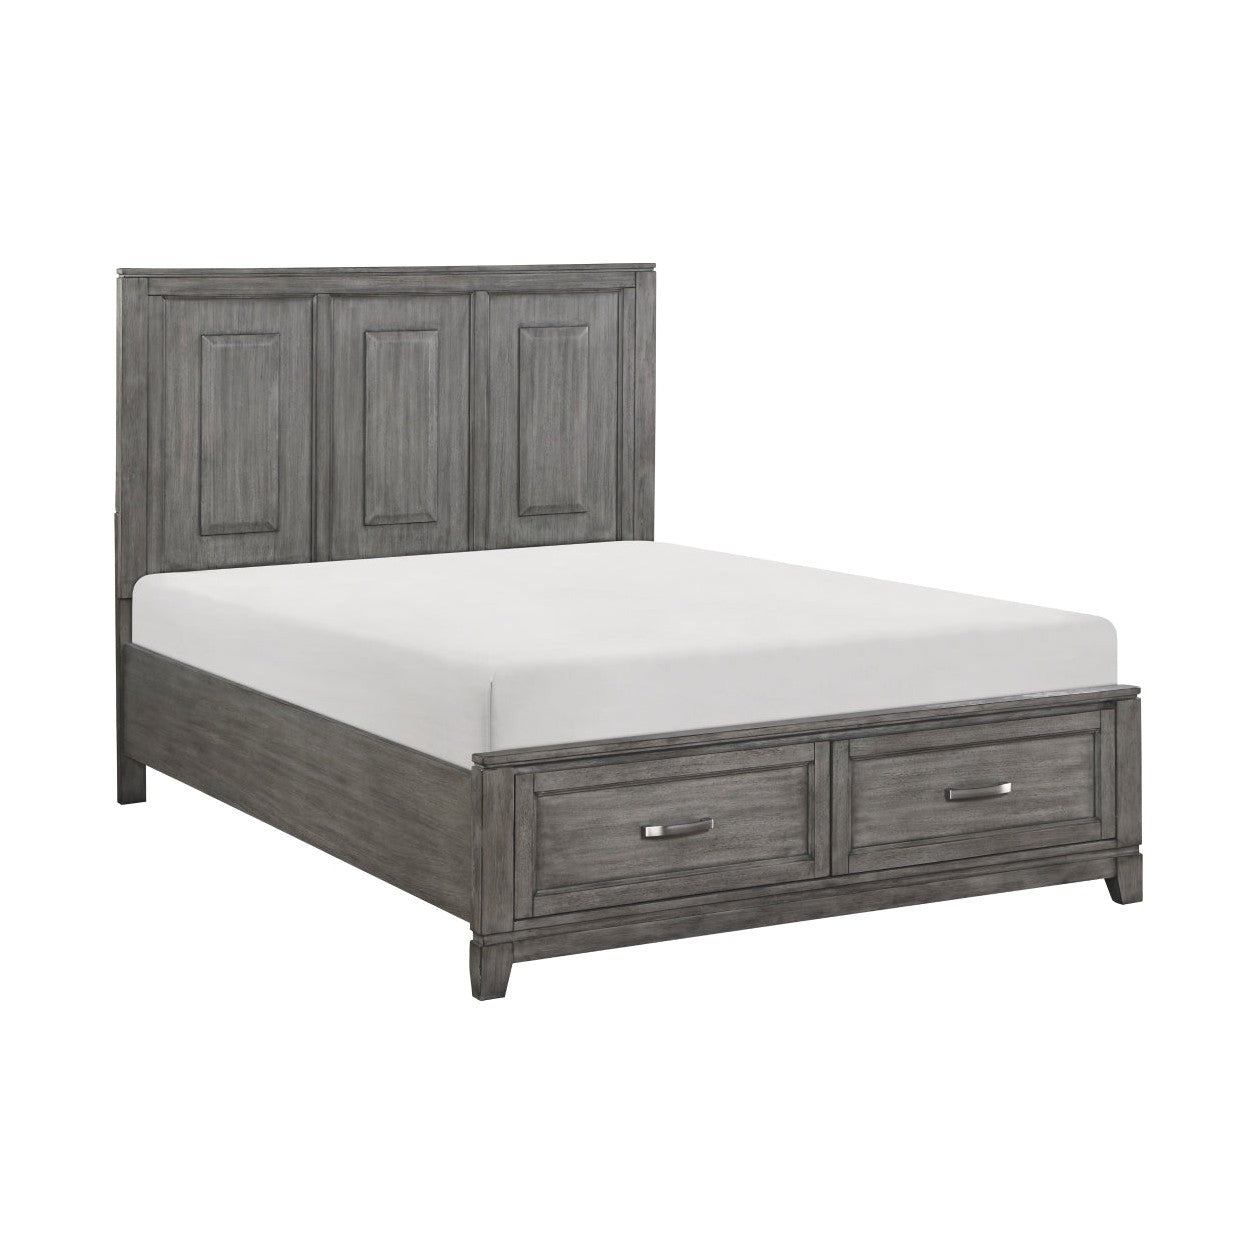 (3) QUEEN PLFM BED W/FB DRAWERS 1450-1*